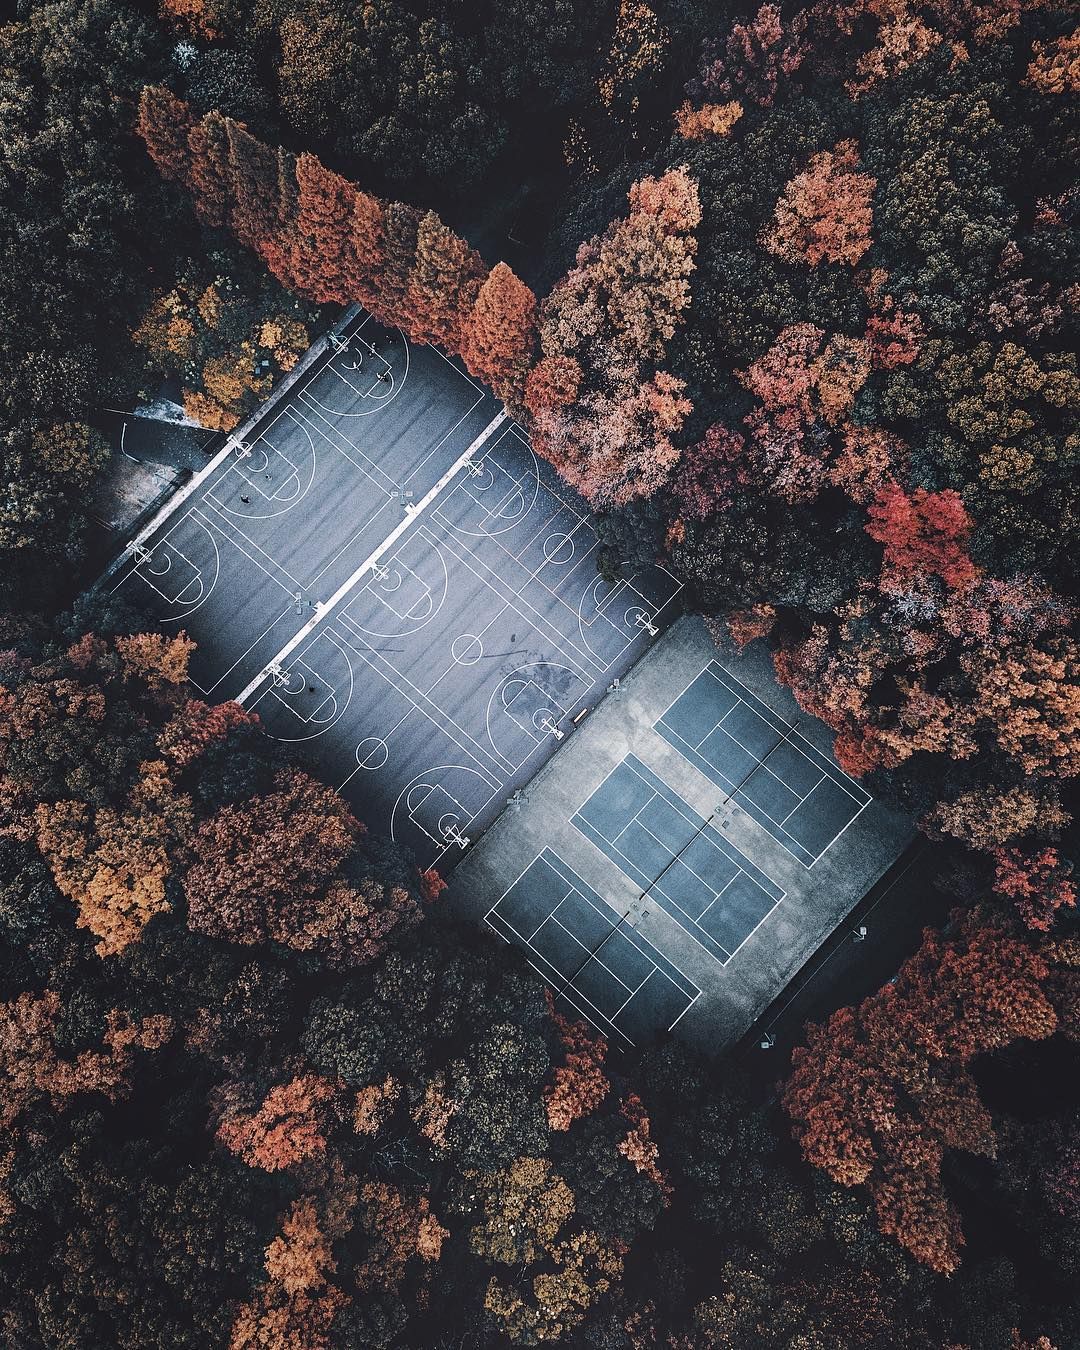 China From Above: Stunning Drone Photography by Yummy Zhu